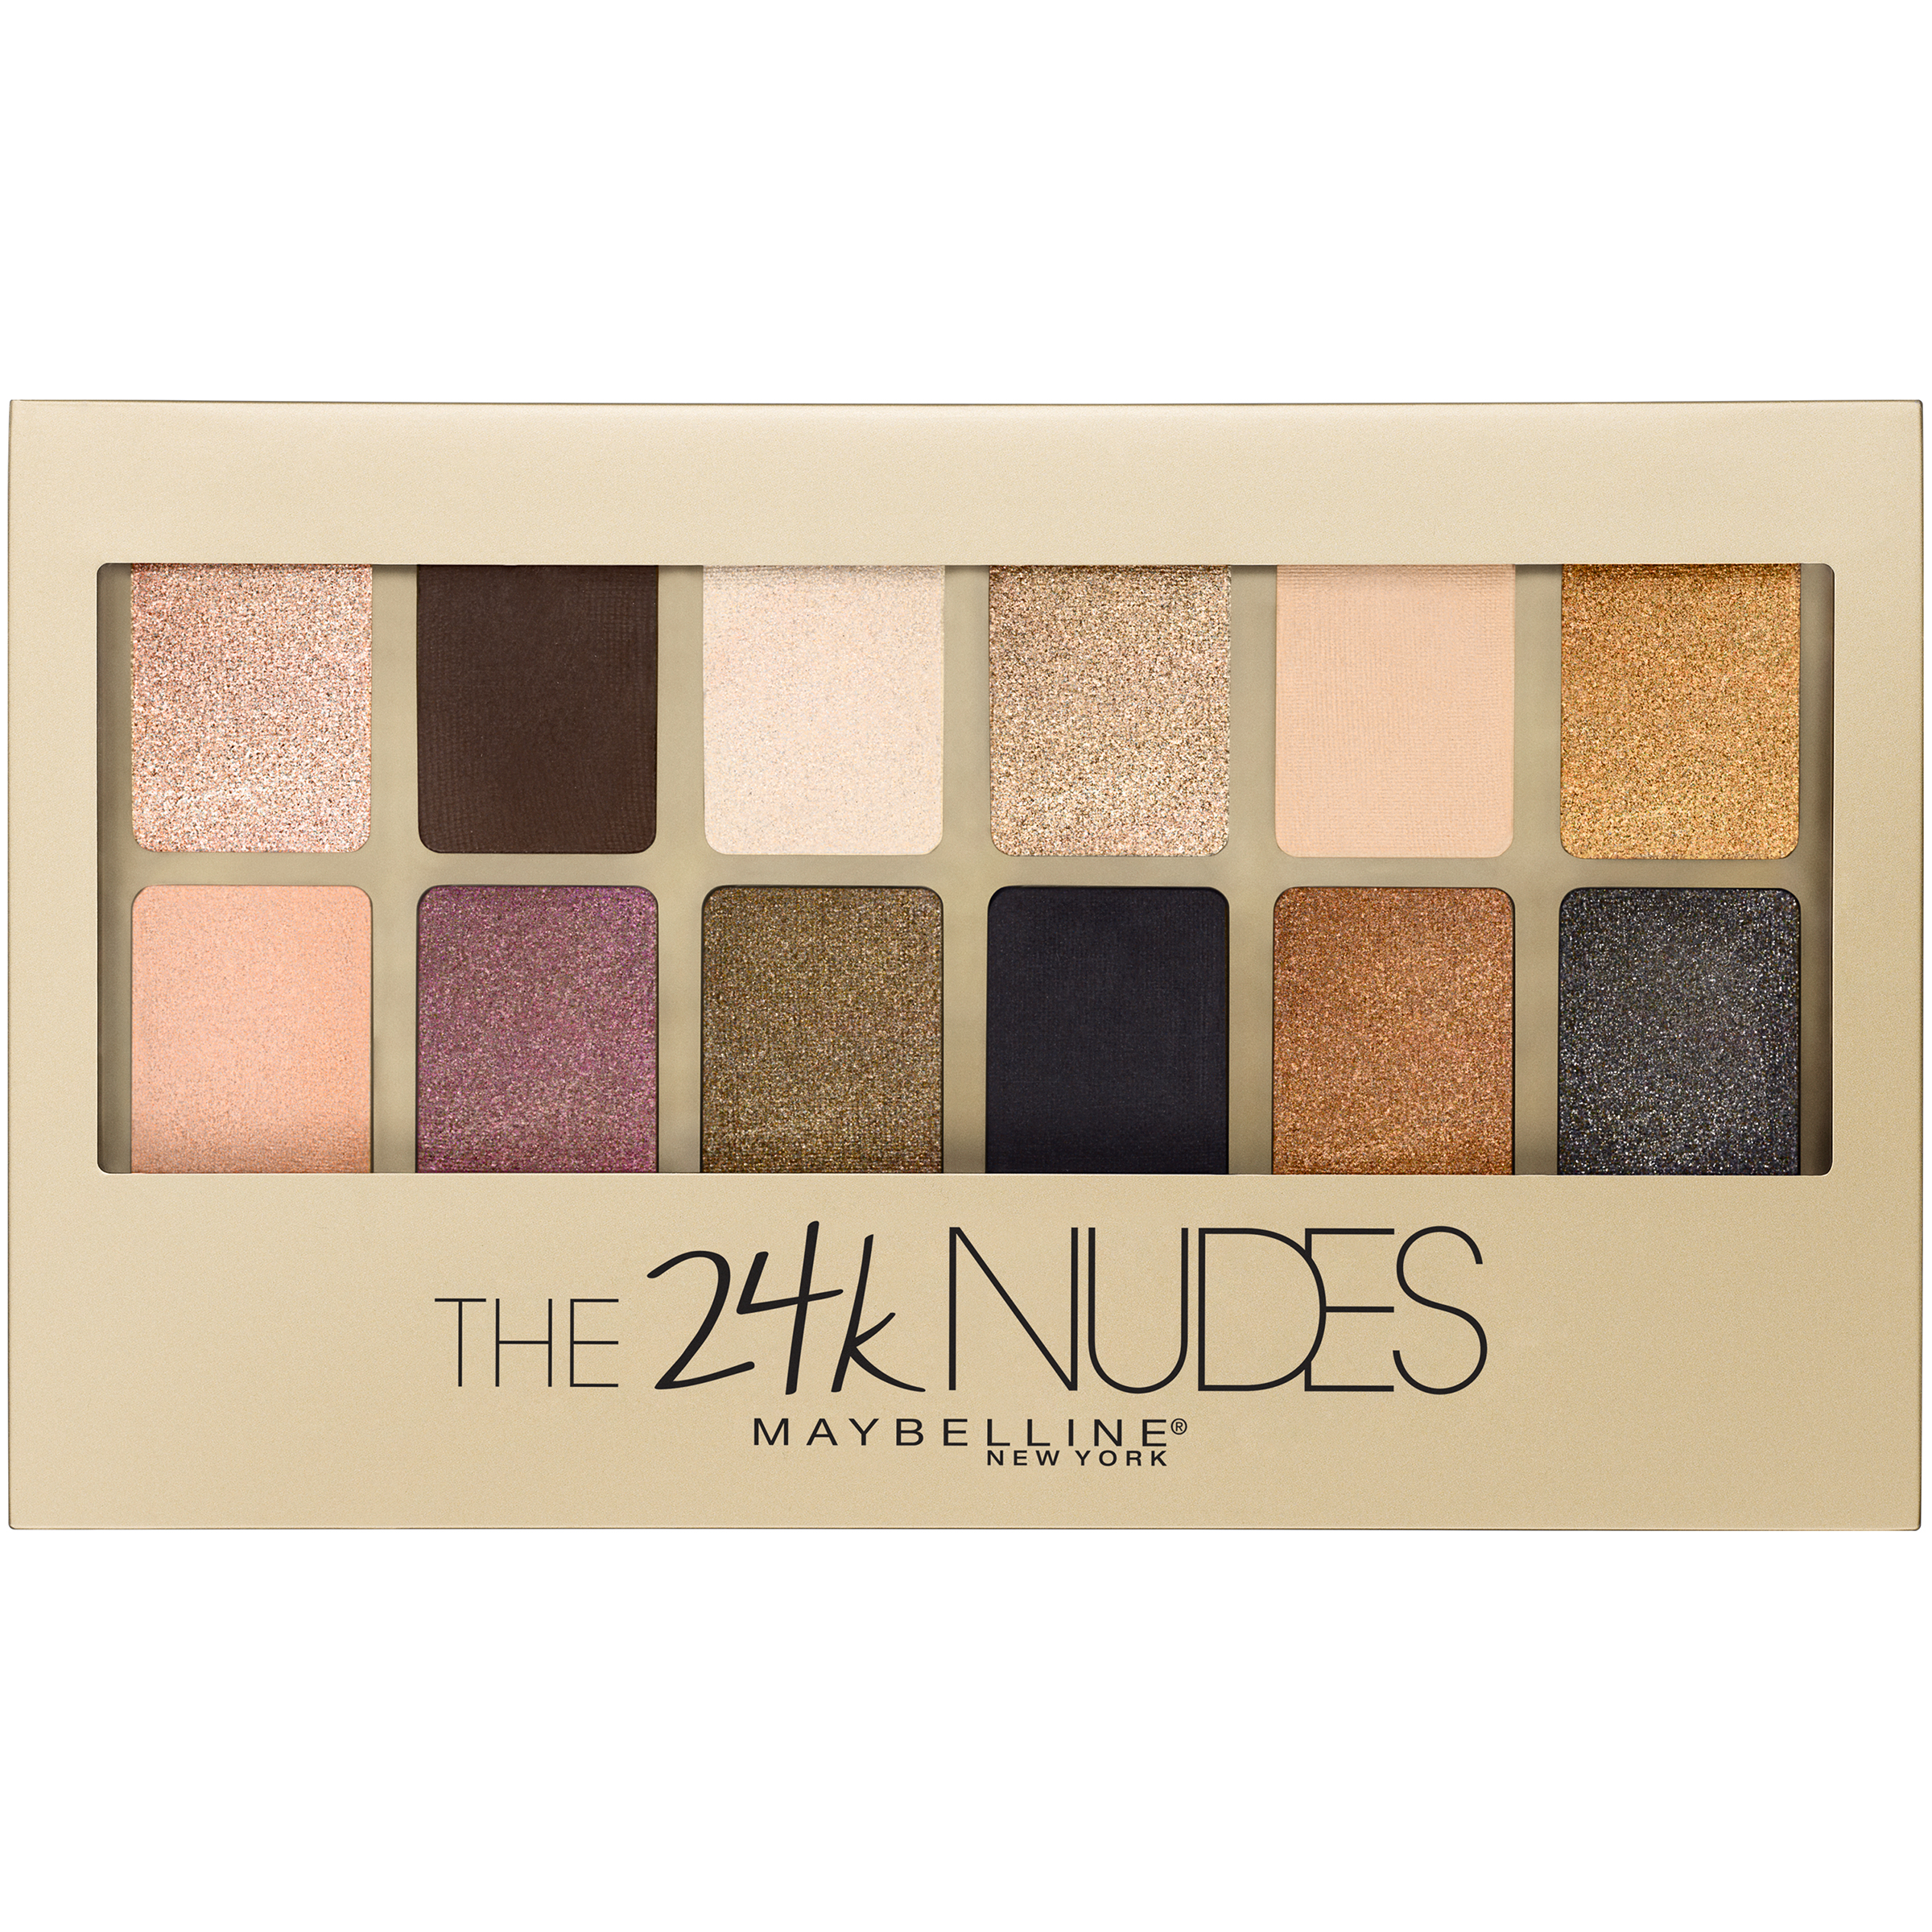 Maybelline New York  The 24K Nudes Eyeshadow Palette 120, 0.34 oz. Compact